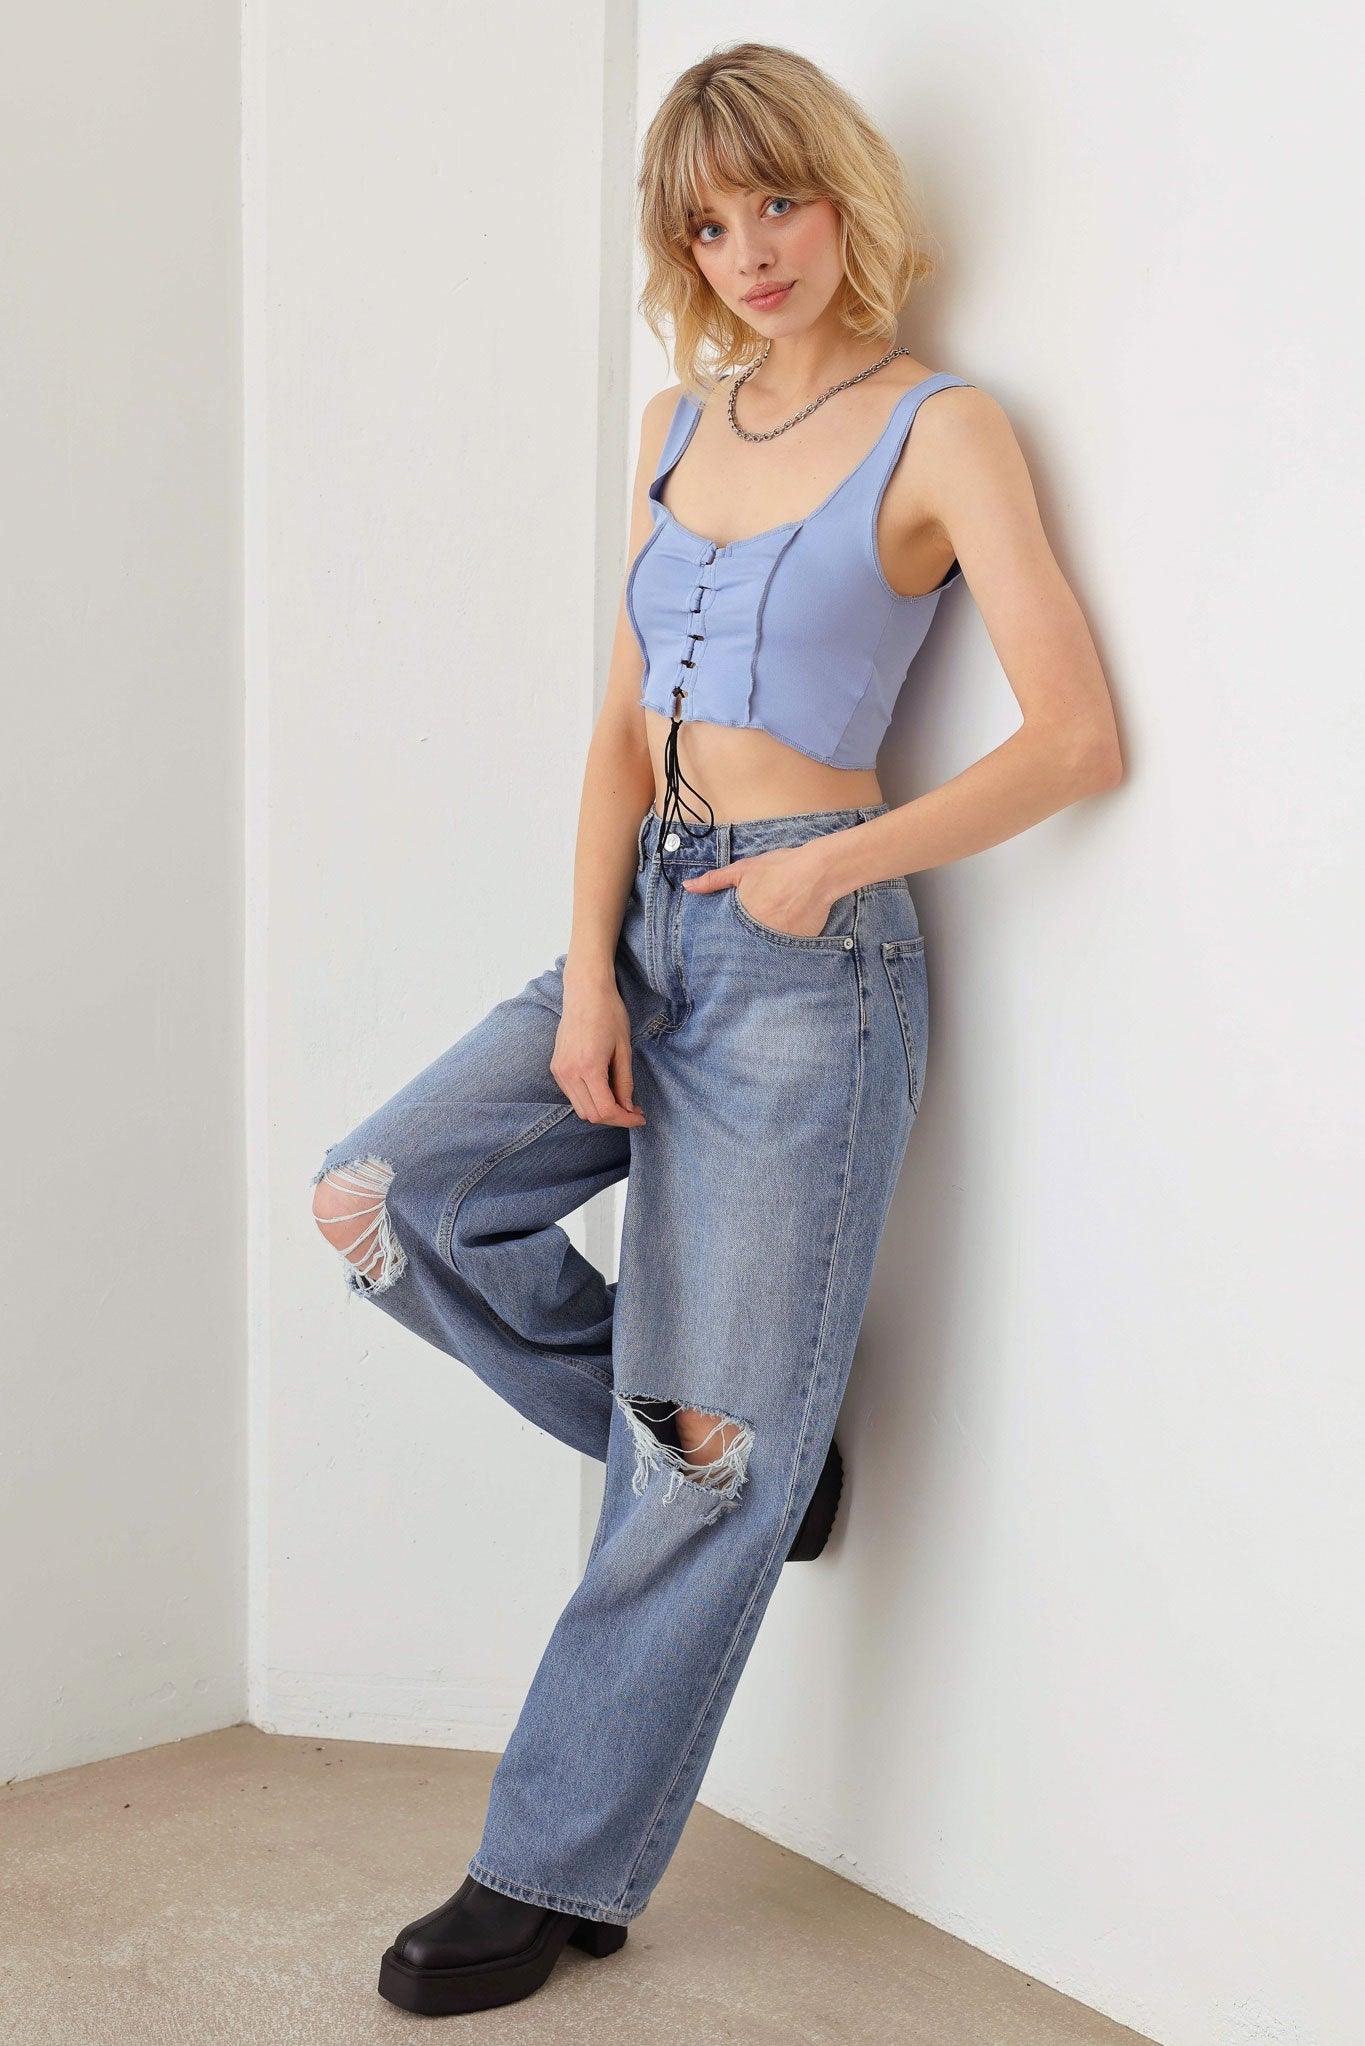 Solid Lace Up Sleeveless Round Neckline Front & Back Crop Top - Tasha Apparel Wholesale